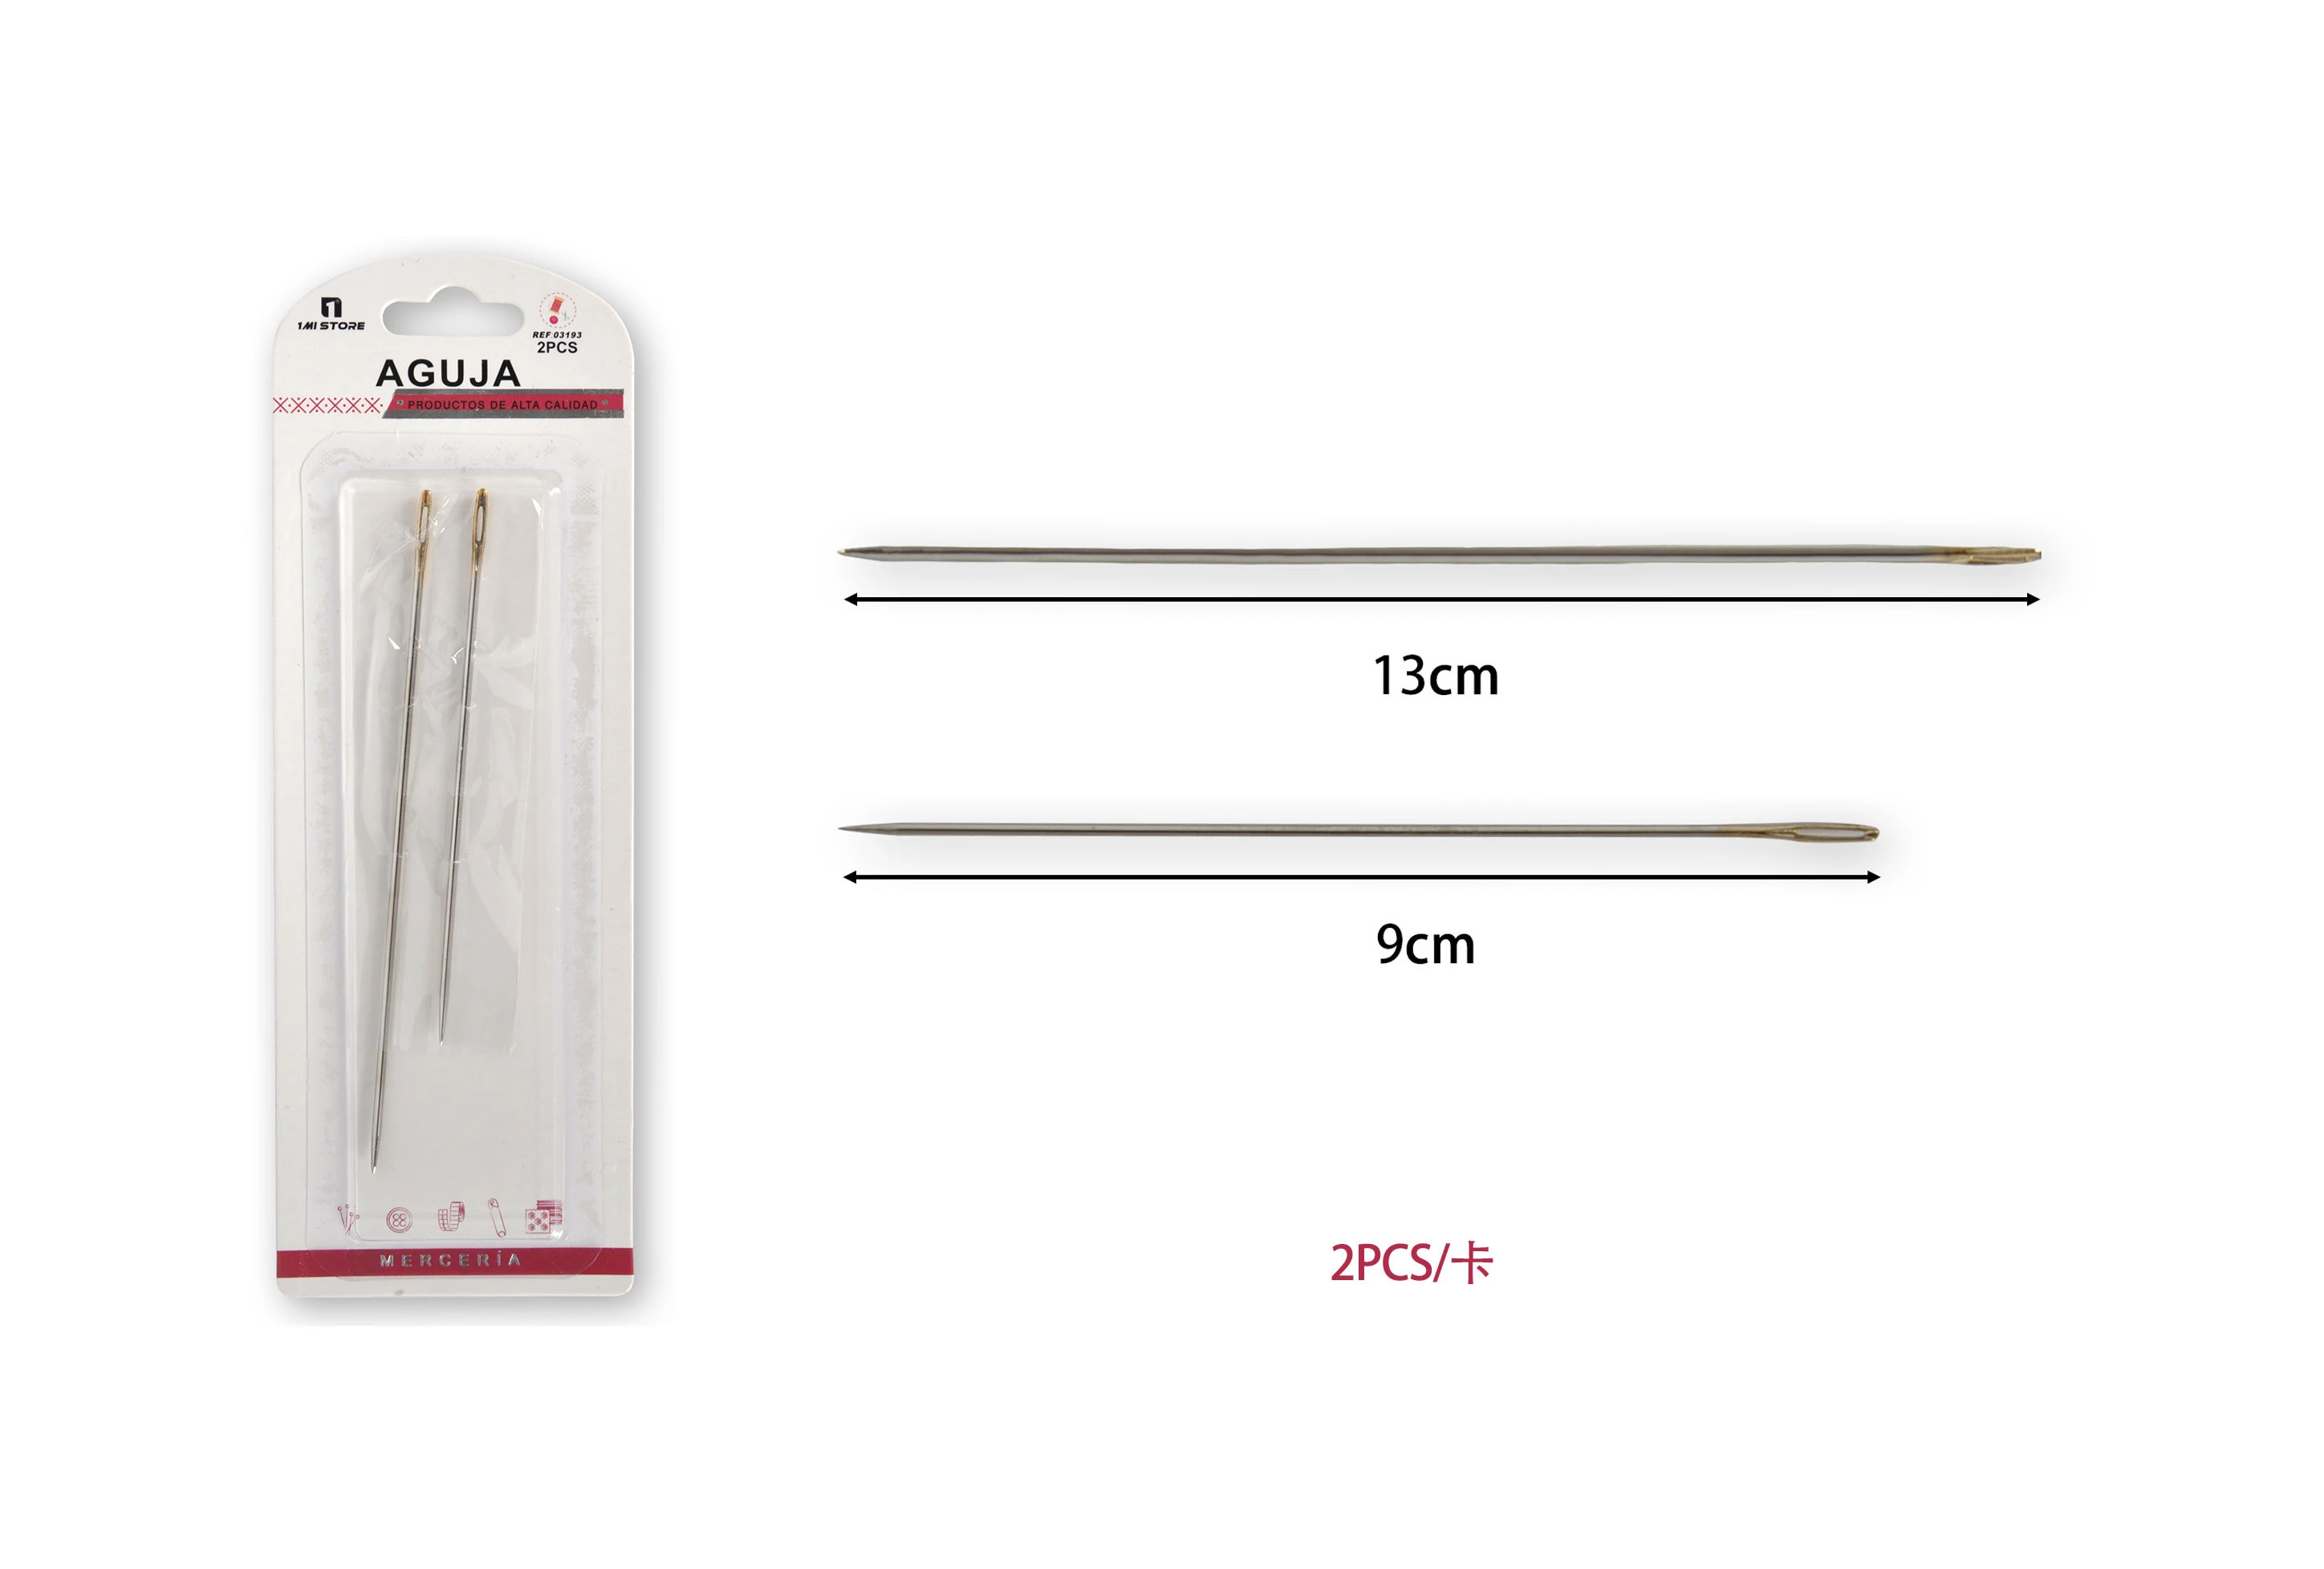 Hot selling Hand Sewing Needles Assorted Size Stainless Steel Blunt Embroidery Sewing Needles